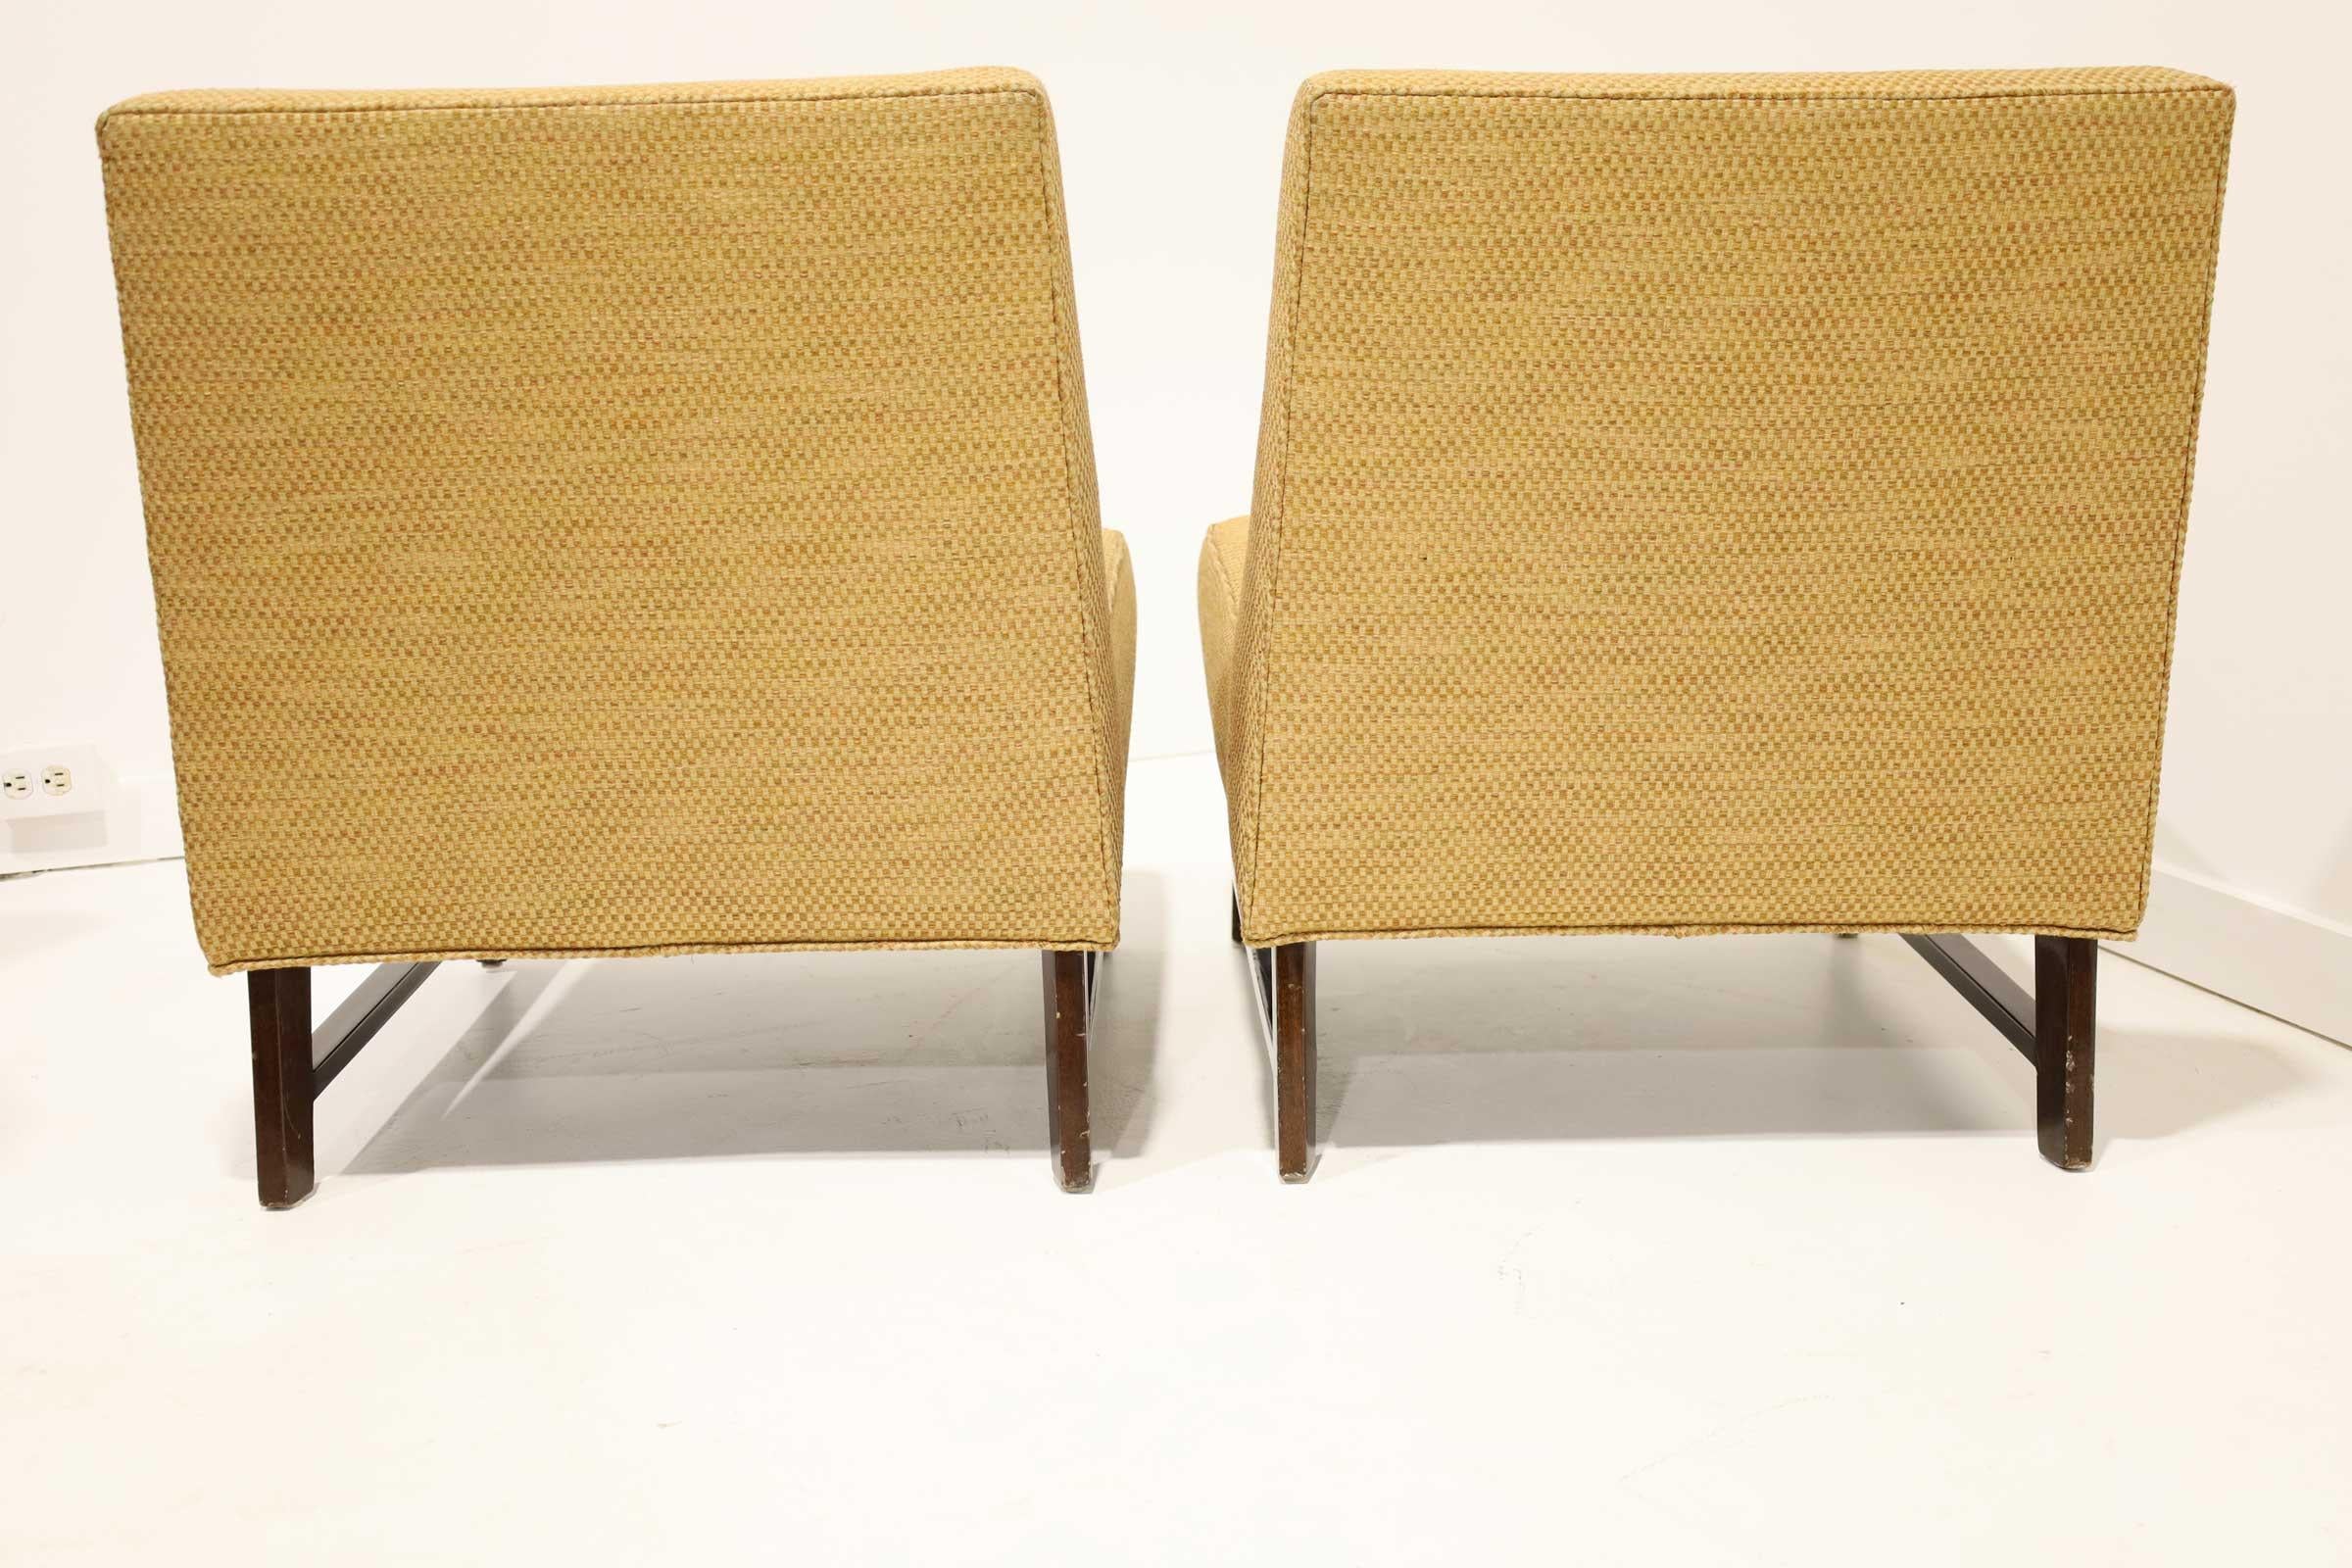 Pair of Edward Wormley for Dunbar Slipper Chairs in Gold Color Upholstery 2